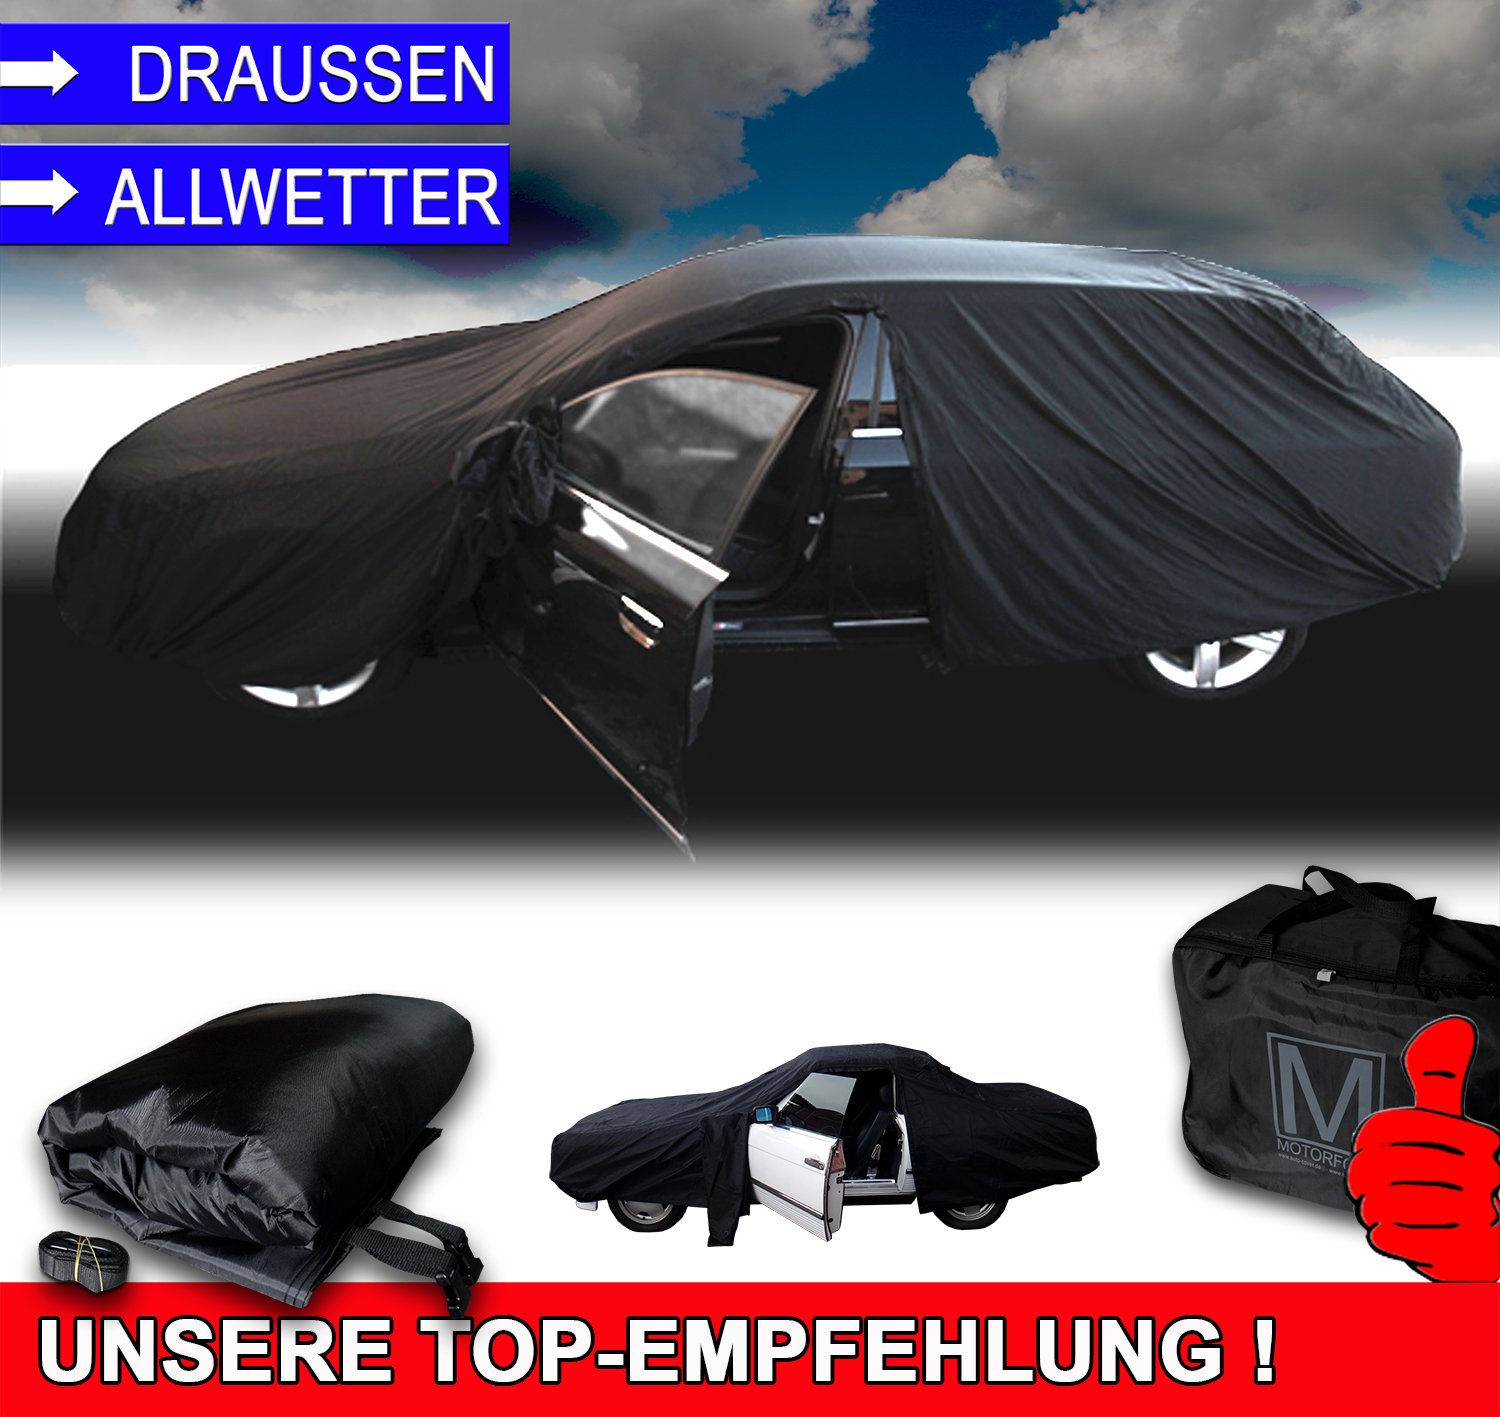 Optimo Outdoor Car Cover for Audi RS2 Avant (1994/95)